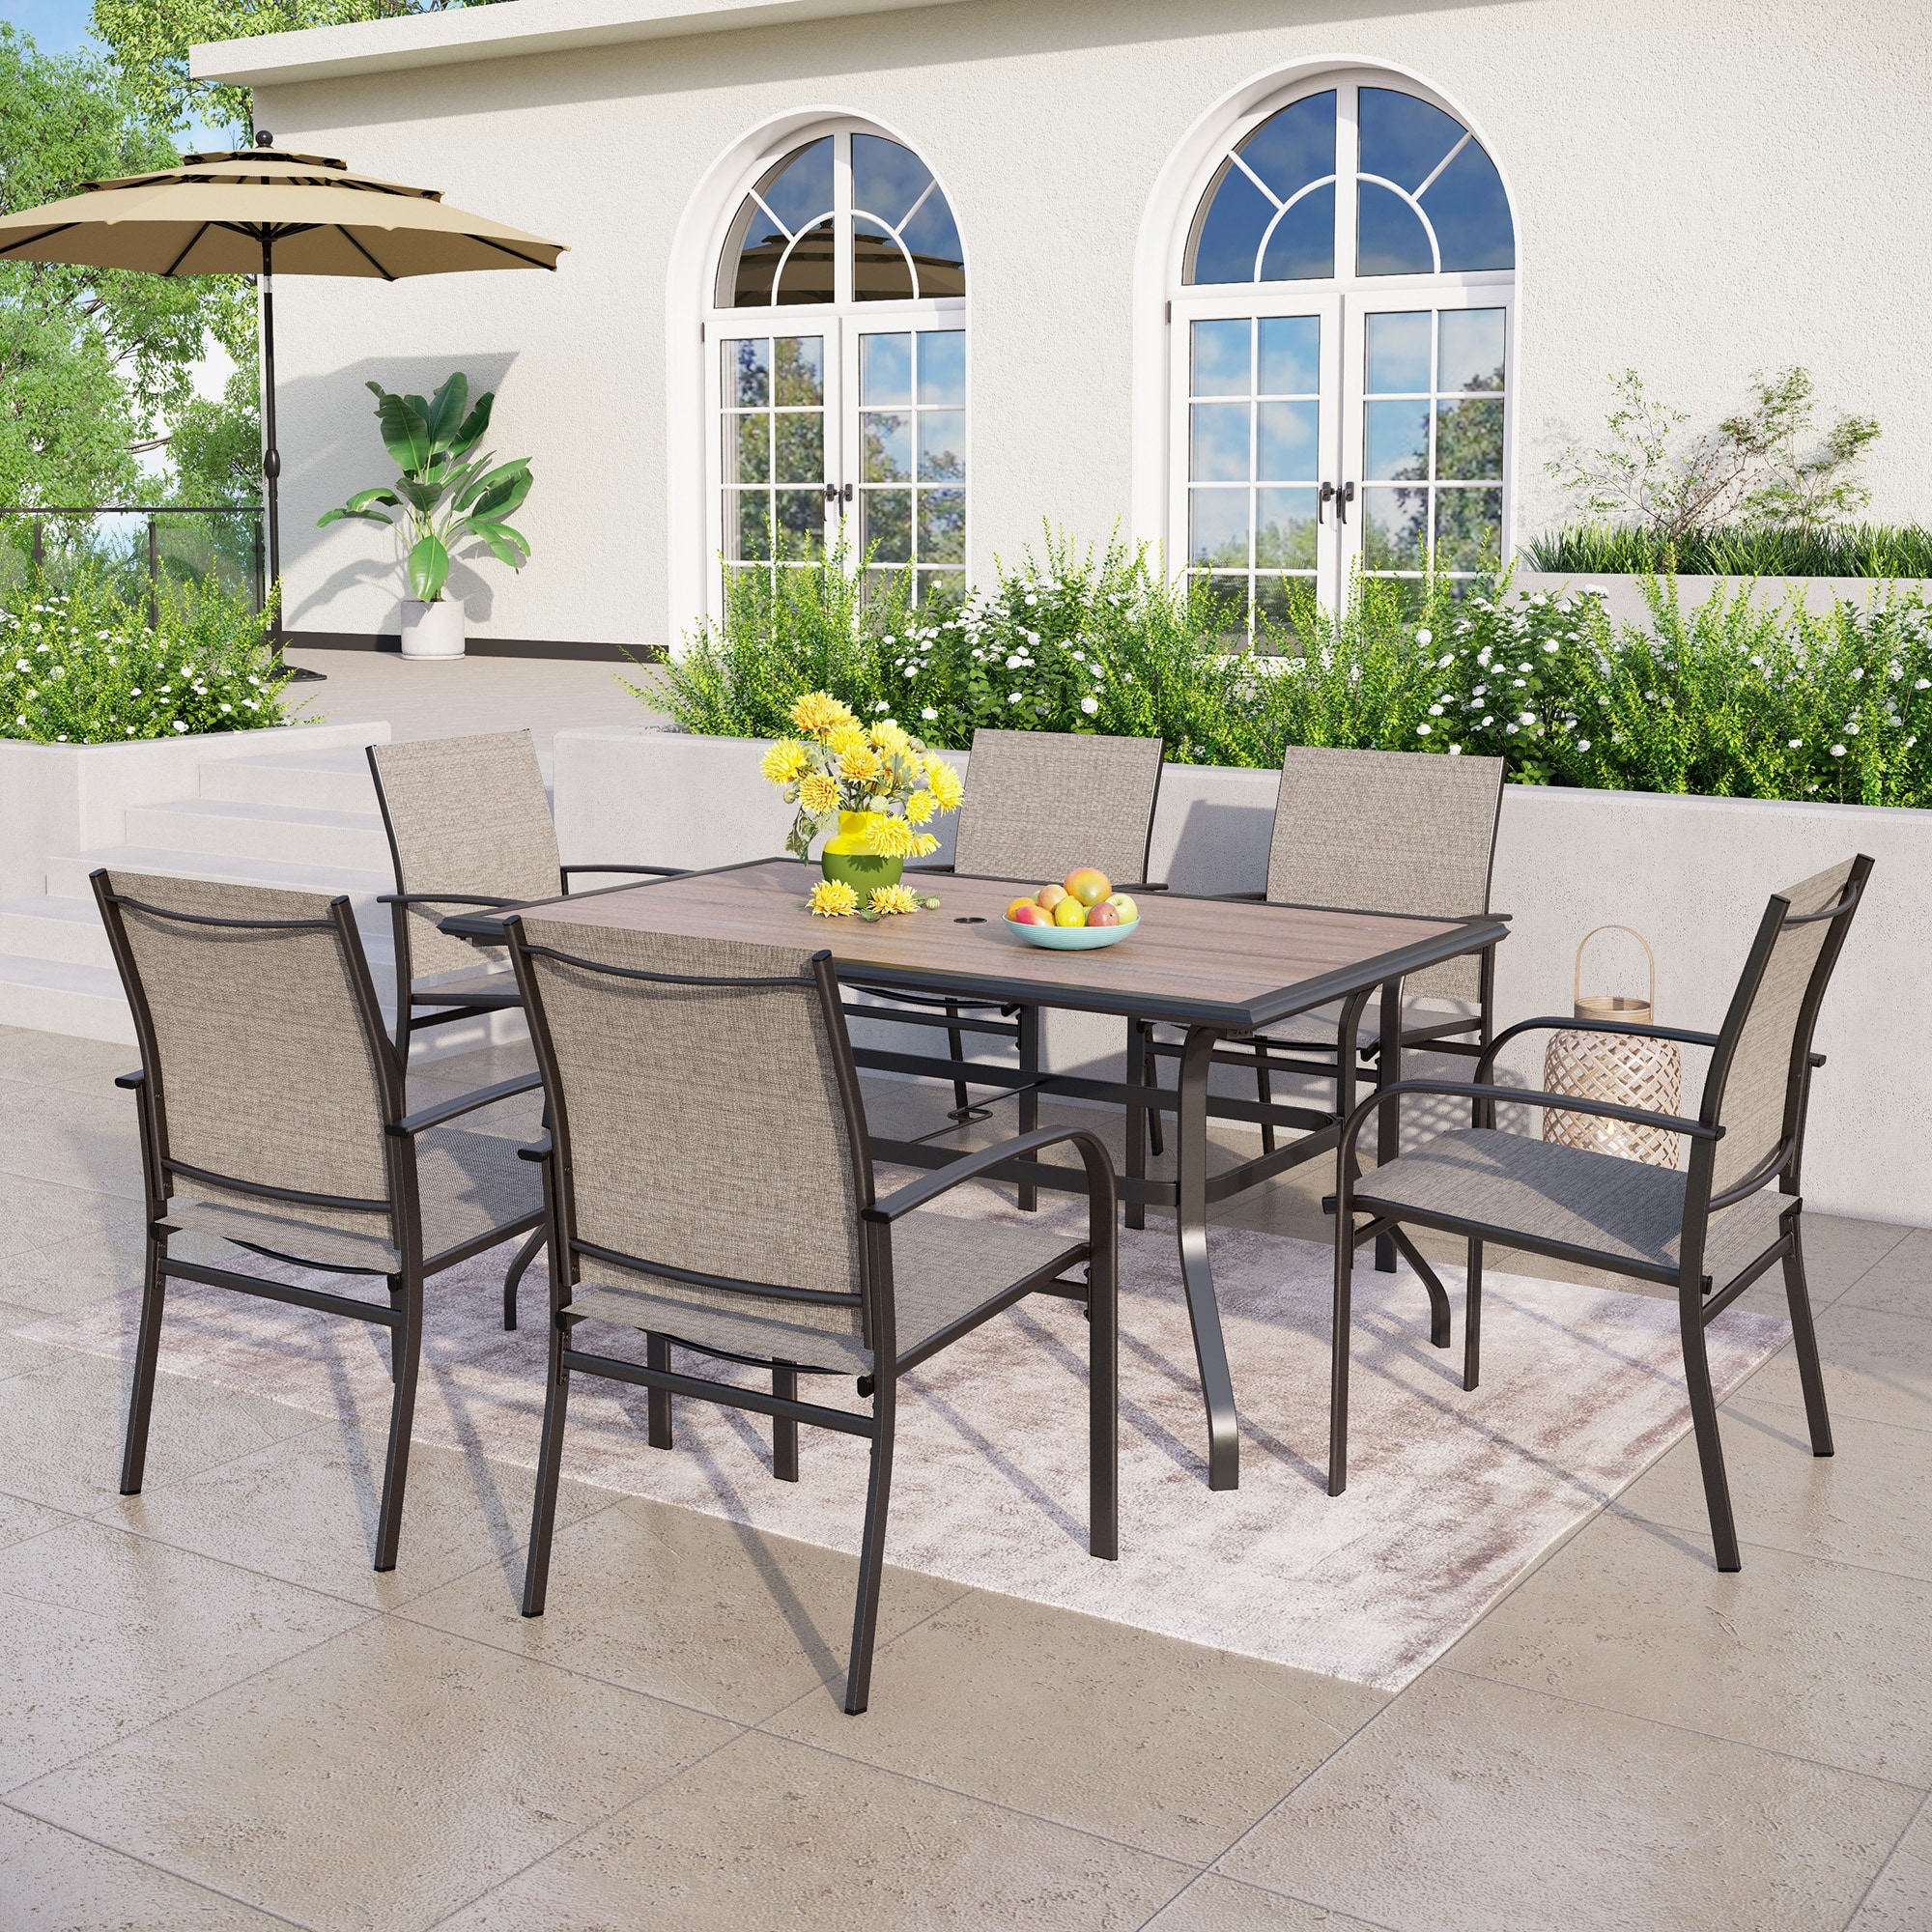 7-piece Patio Dining Set Wood-look Rectangle Table And 6 Textilene Chairs